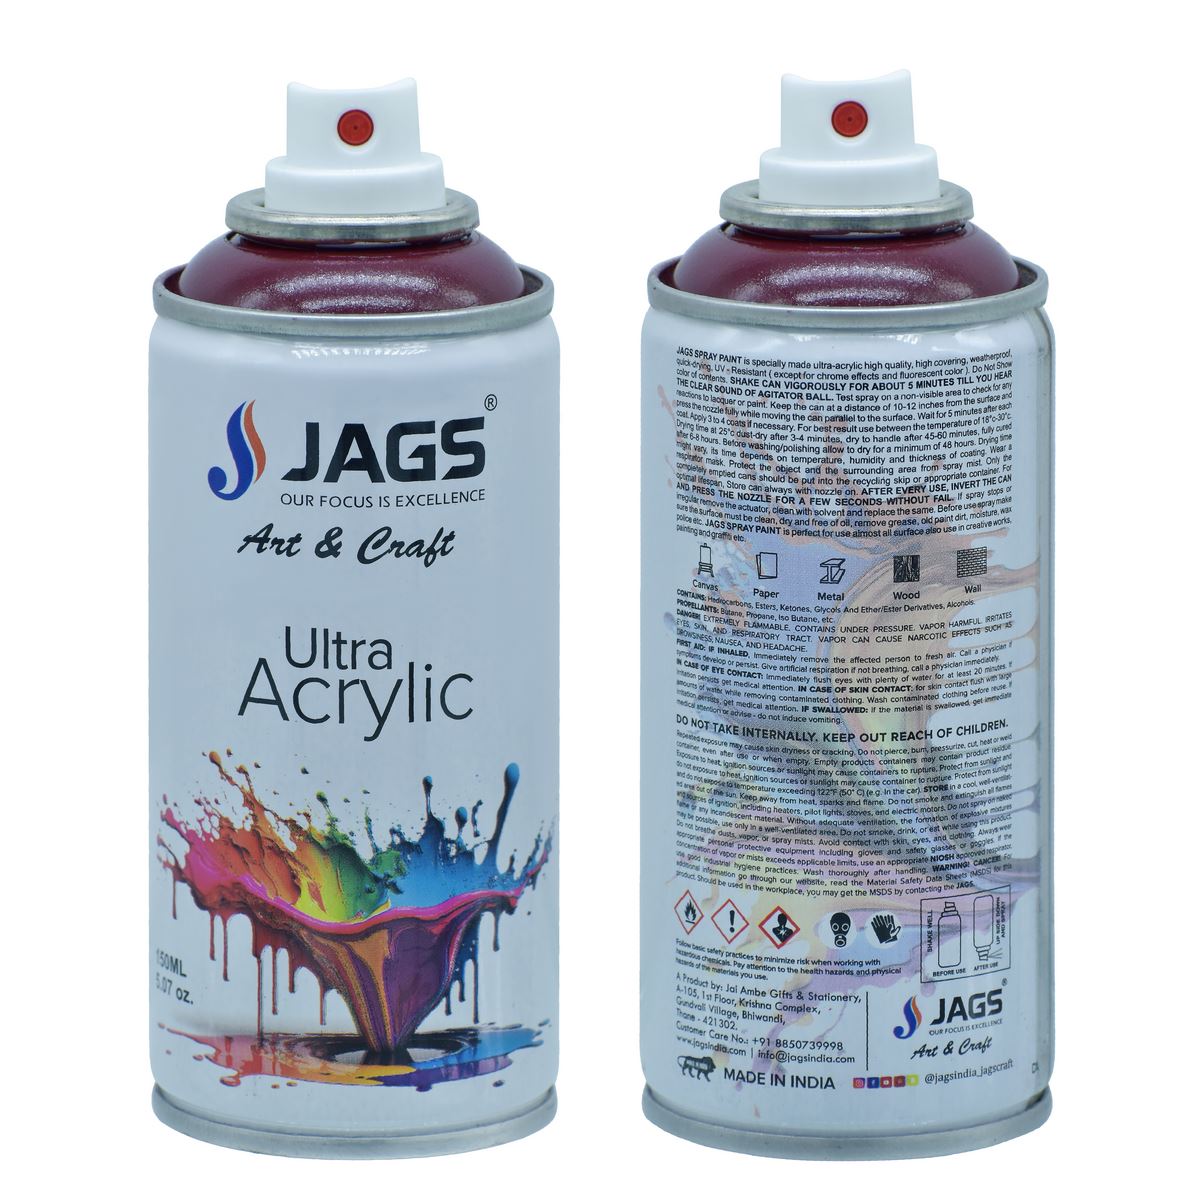 jags-mumbai Paint & Colours Jags Spray Ultra Acrylic 150ml Wine Red: Precision and Performance in Every Spray